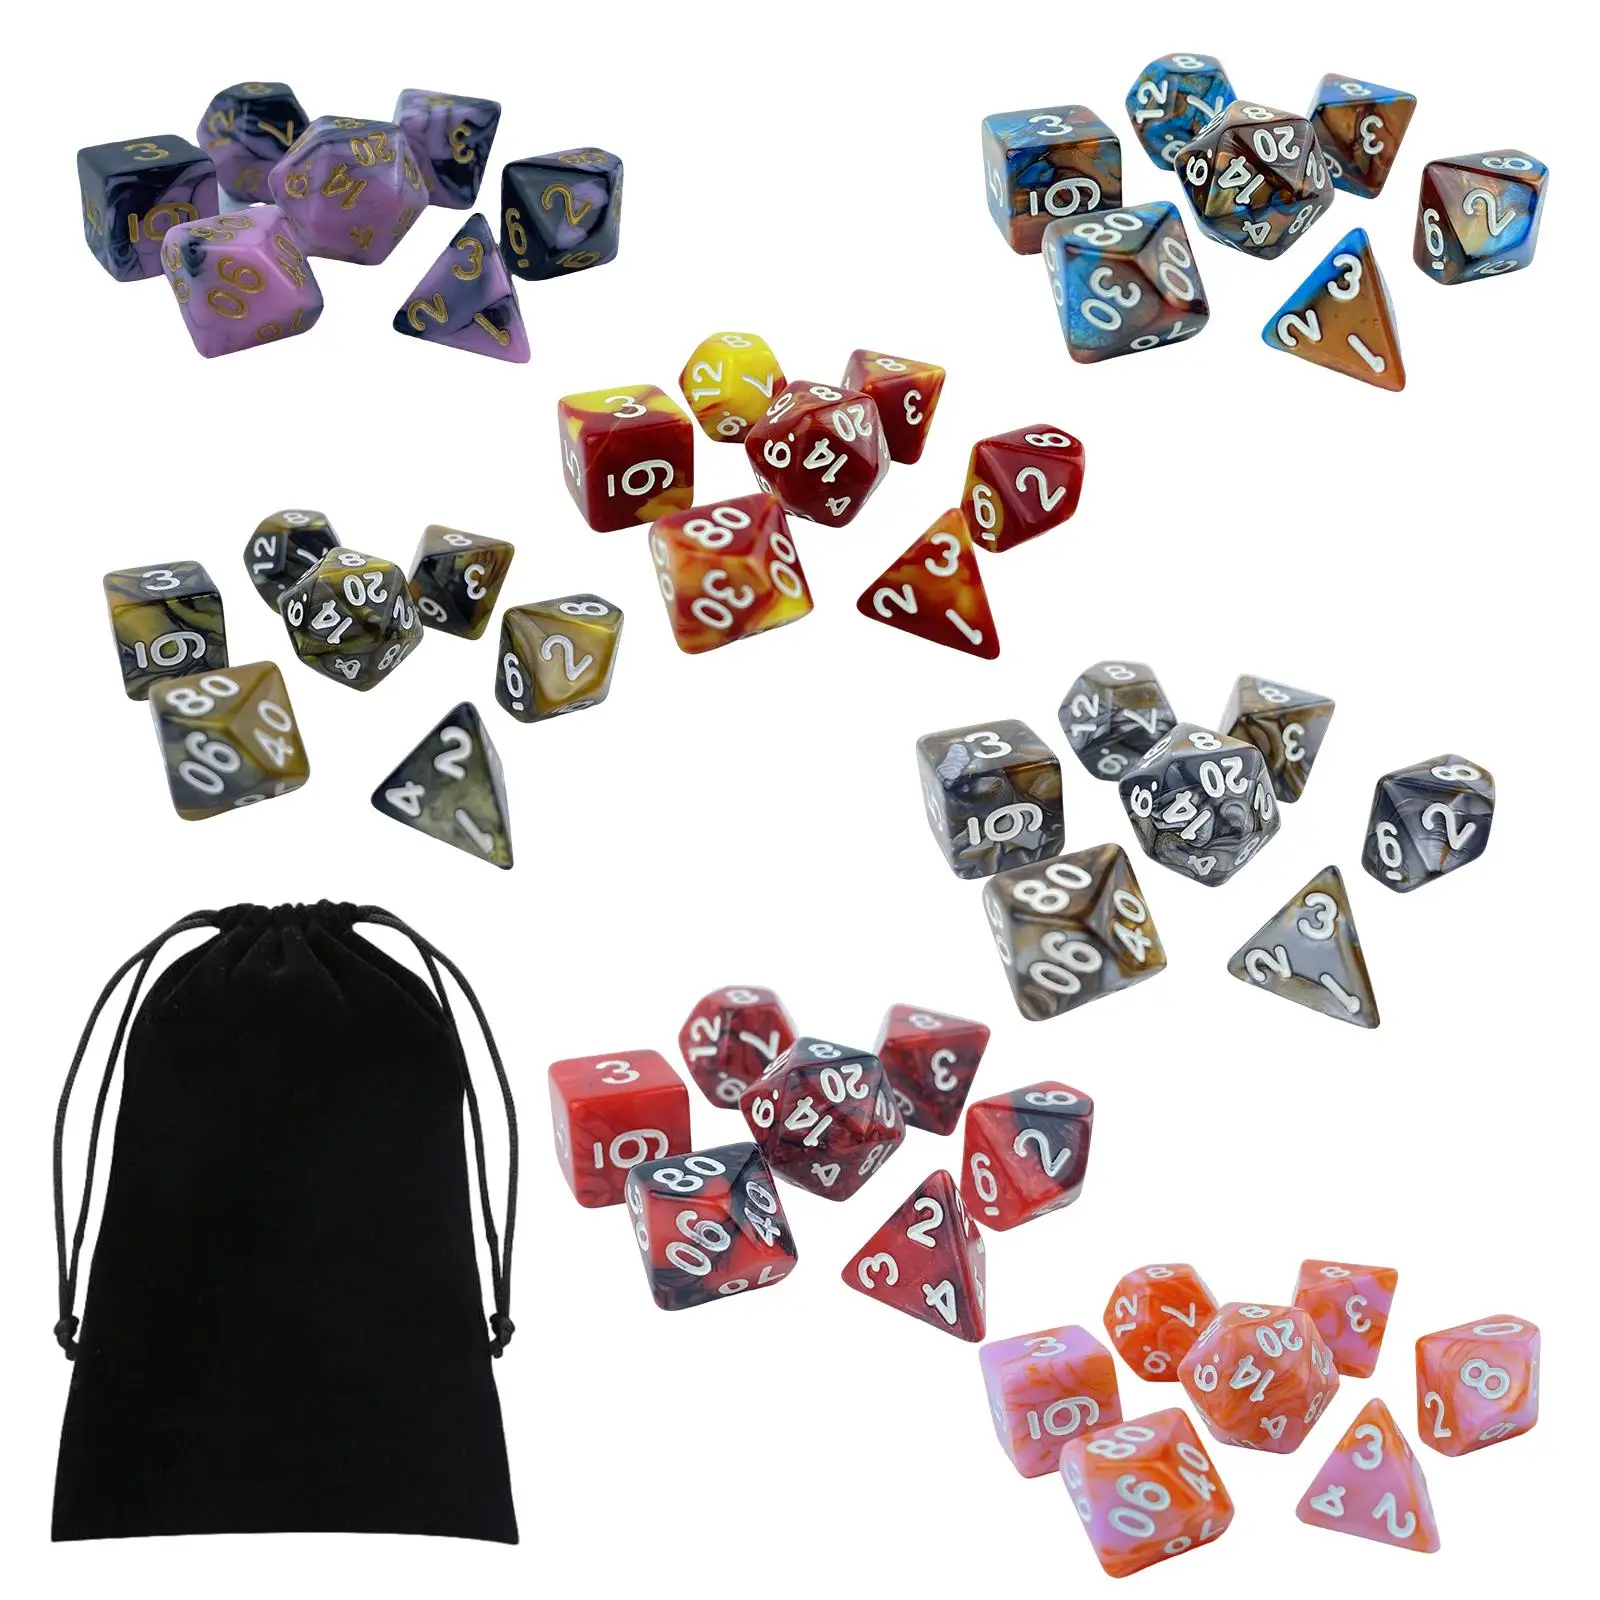 49Pcs Engraved Polyhedral Dices Set D4 D6 D8 D10 D12 D20 Puzzle Games Craft for Role Playing Board Games KTV Parties Props